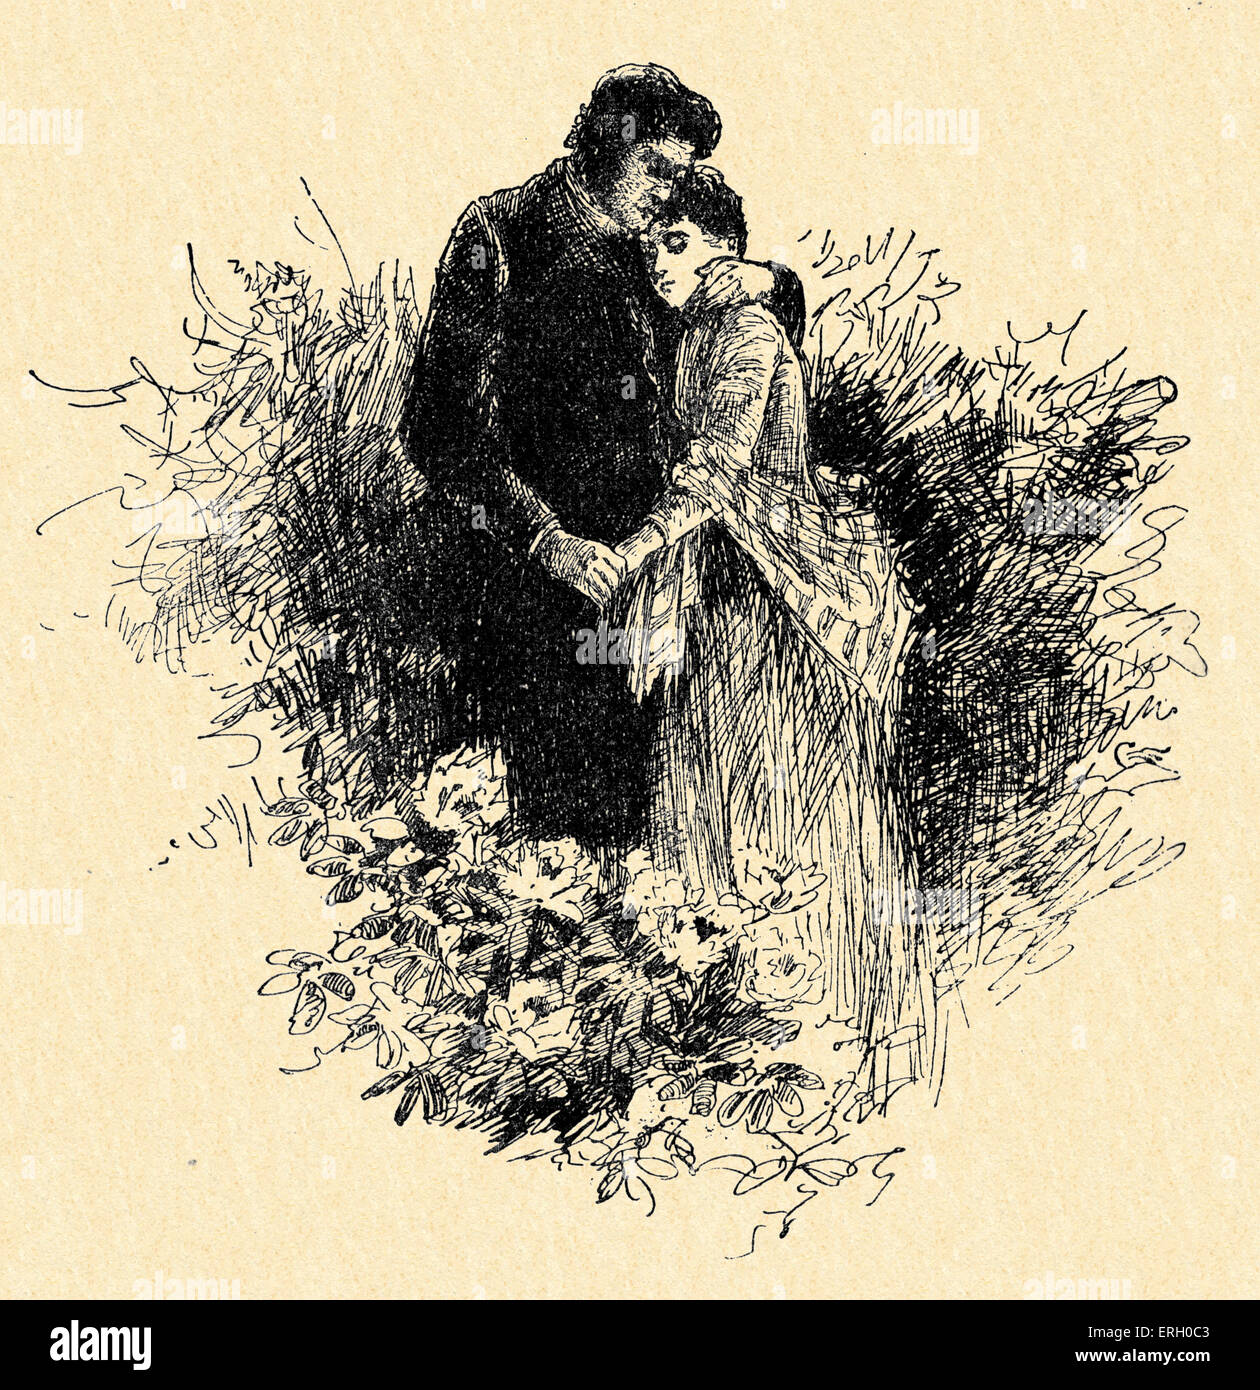 Jane Eyre by Charlotte Brontë. Caption reads: 'Are you happy, Jane ?' (Mr Rochester and Jane Eyre). Charlotte Brontë, British Stock Photo